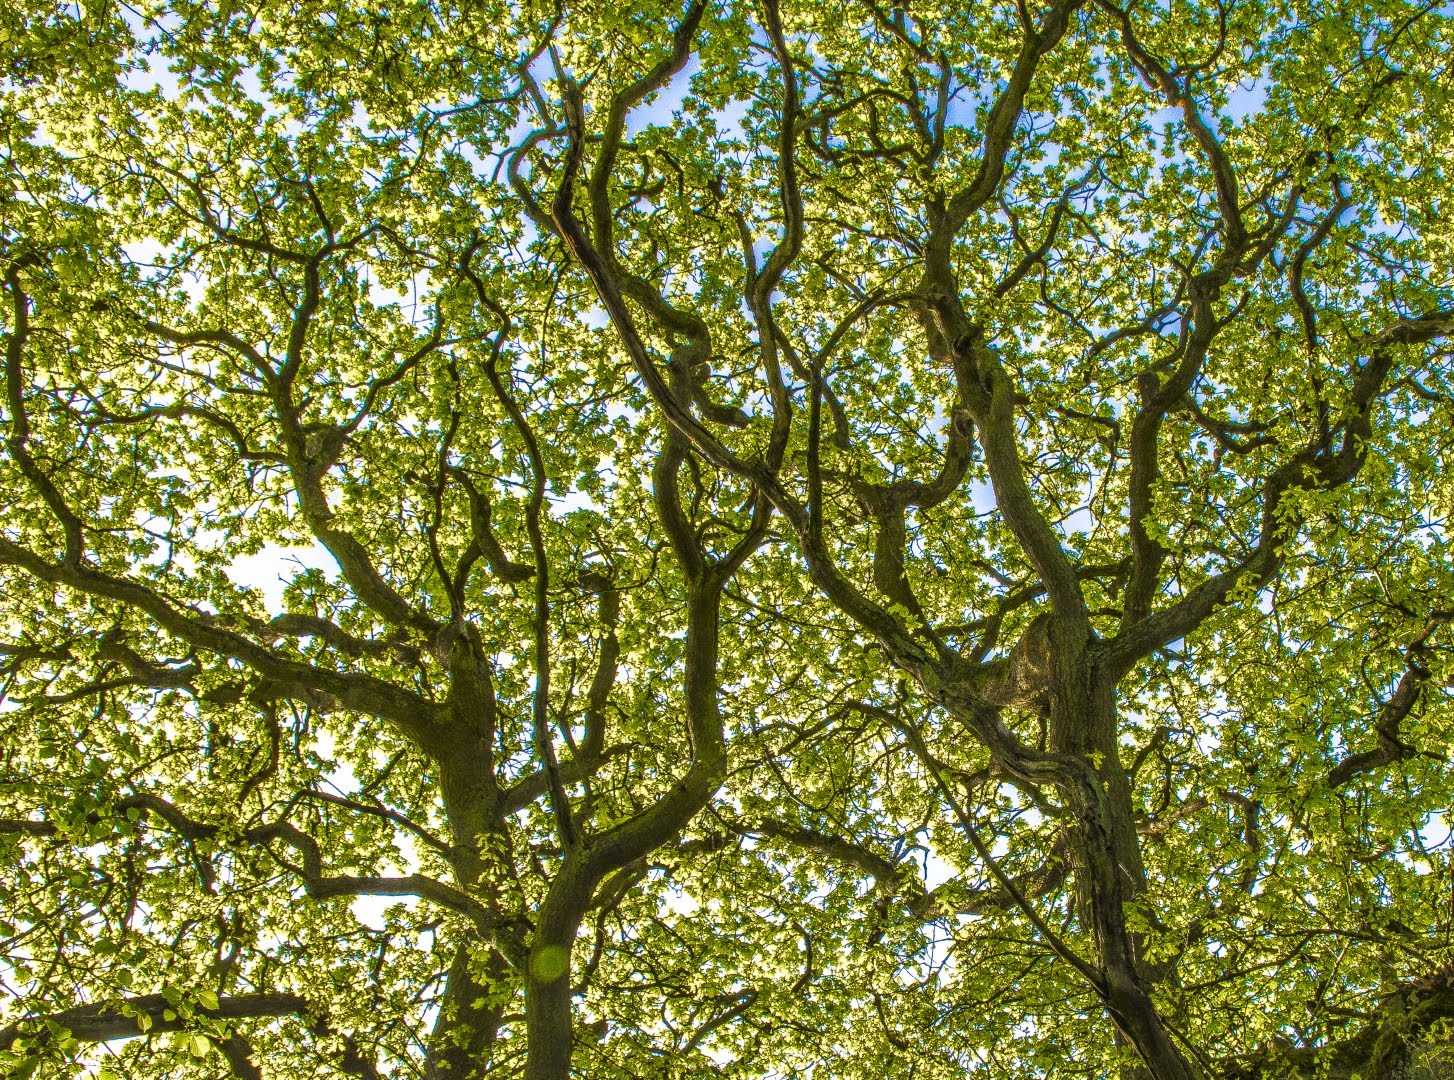 View looking up into oak tree canopy